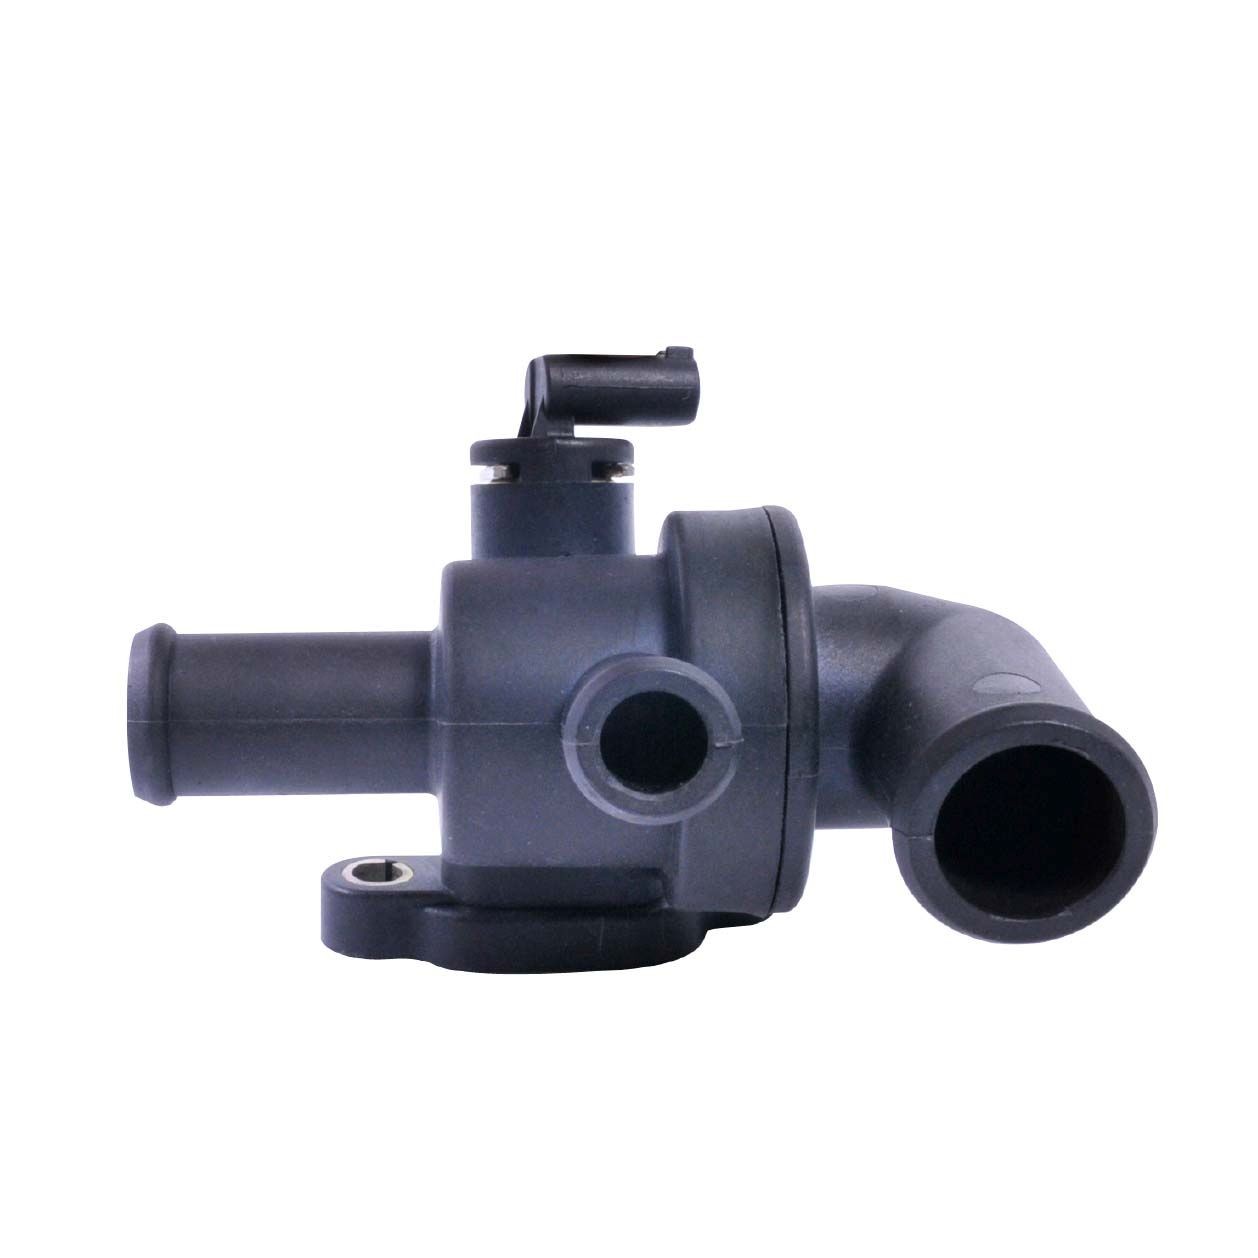 GATES TH40390G1 Engine thermostat Opening Temperature: 90°C, with gaskets/seals, with housing